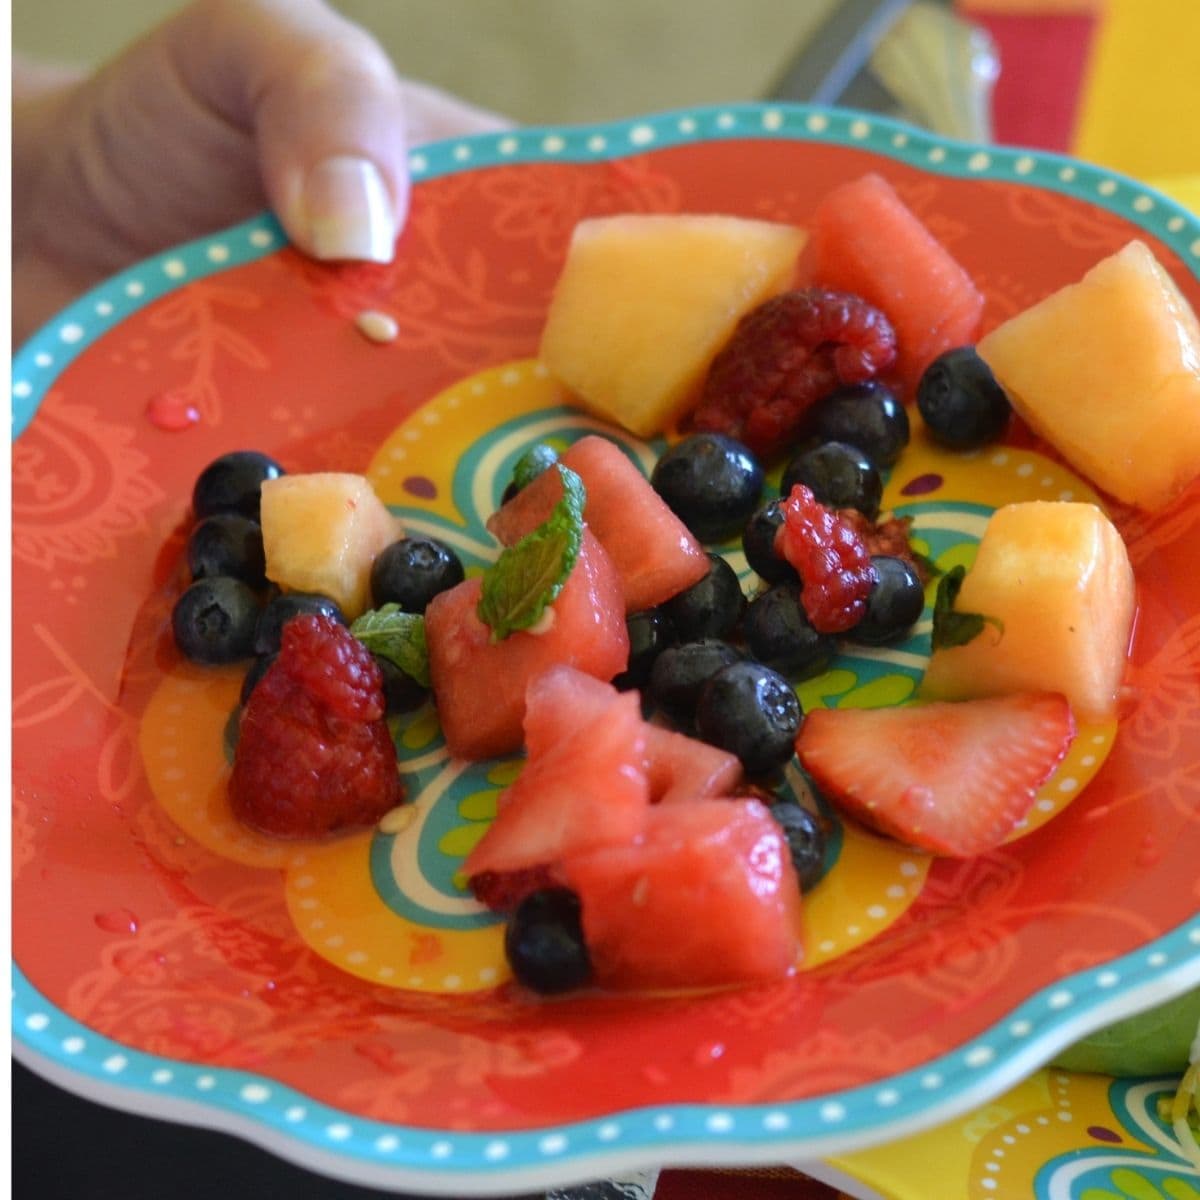 A plate with a serving of summer fruit salad.